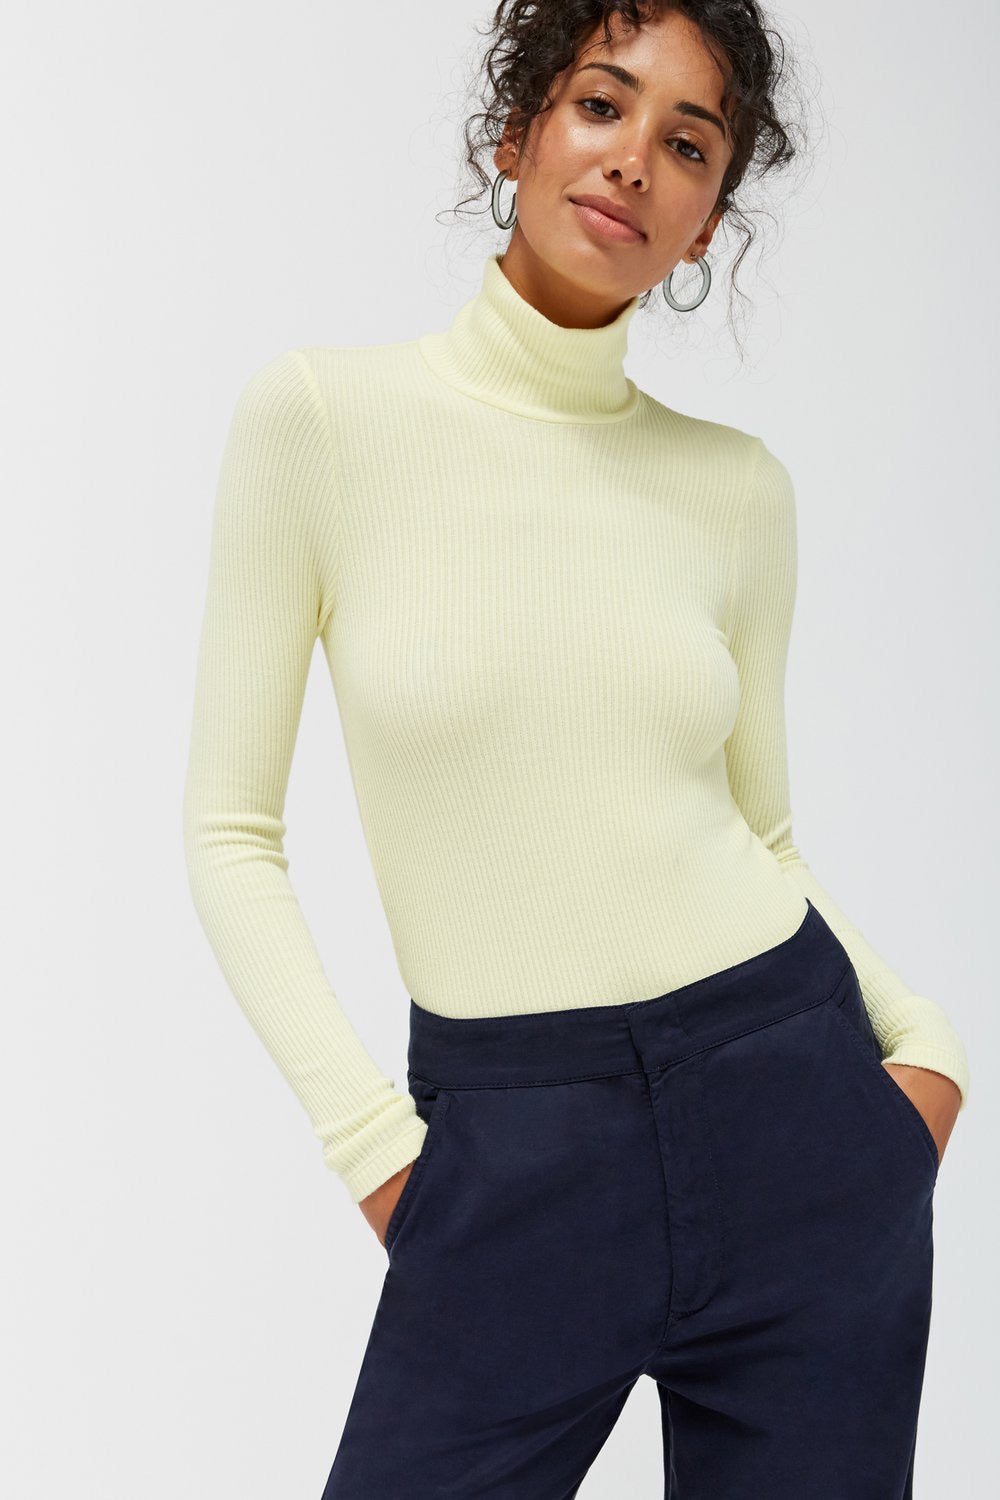 Fitted Ribbed Turtleneck Sweater